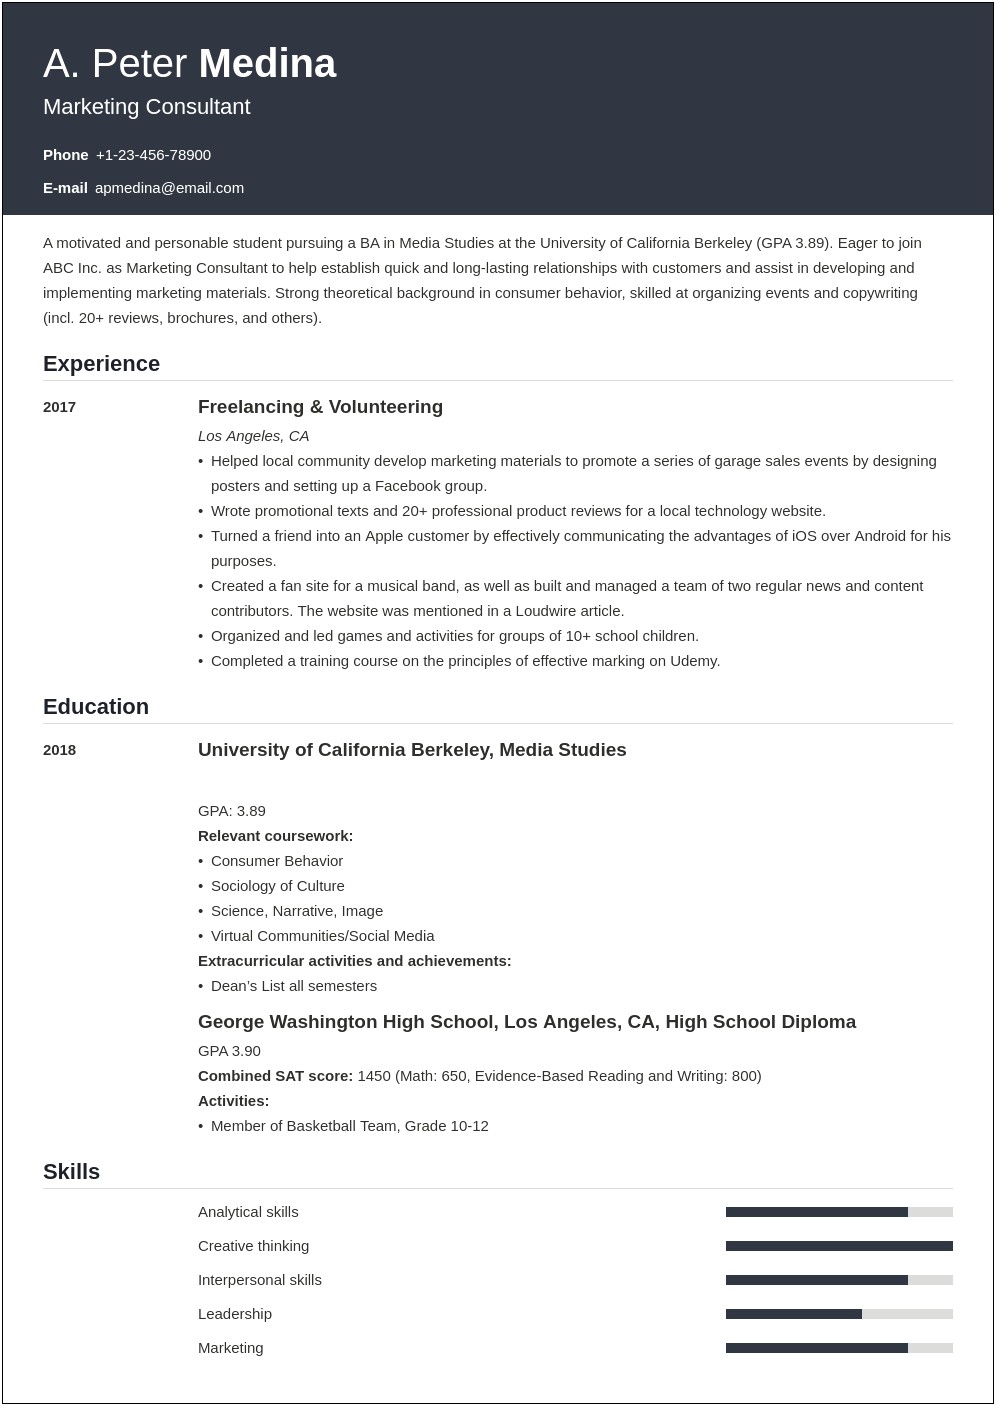 Entry Level Information Techonology Resume No Experience Sampel